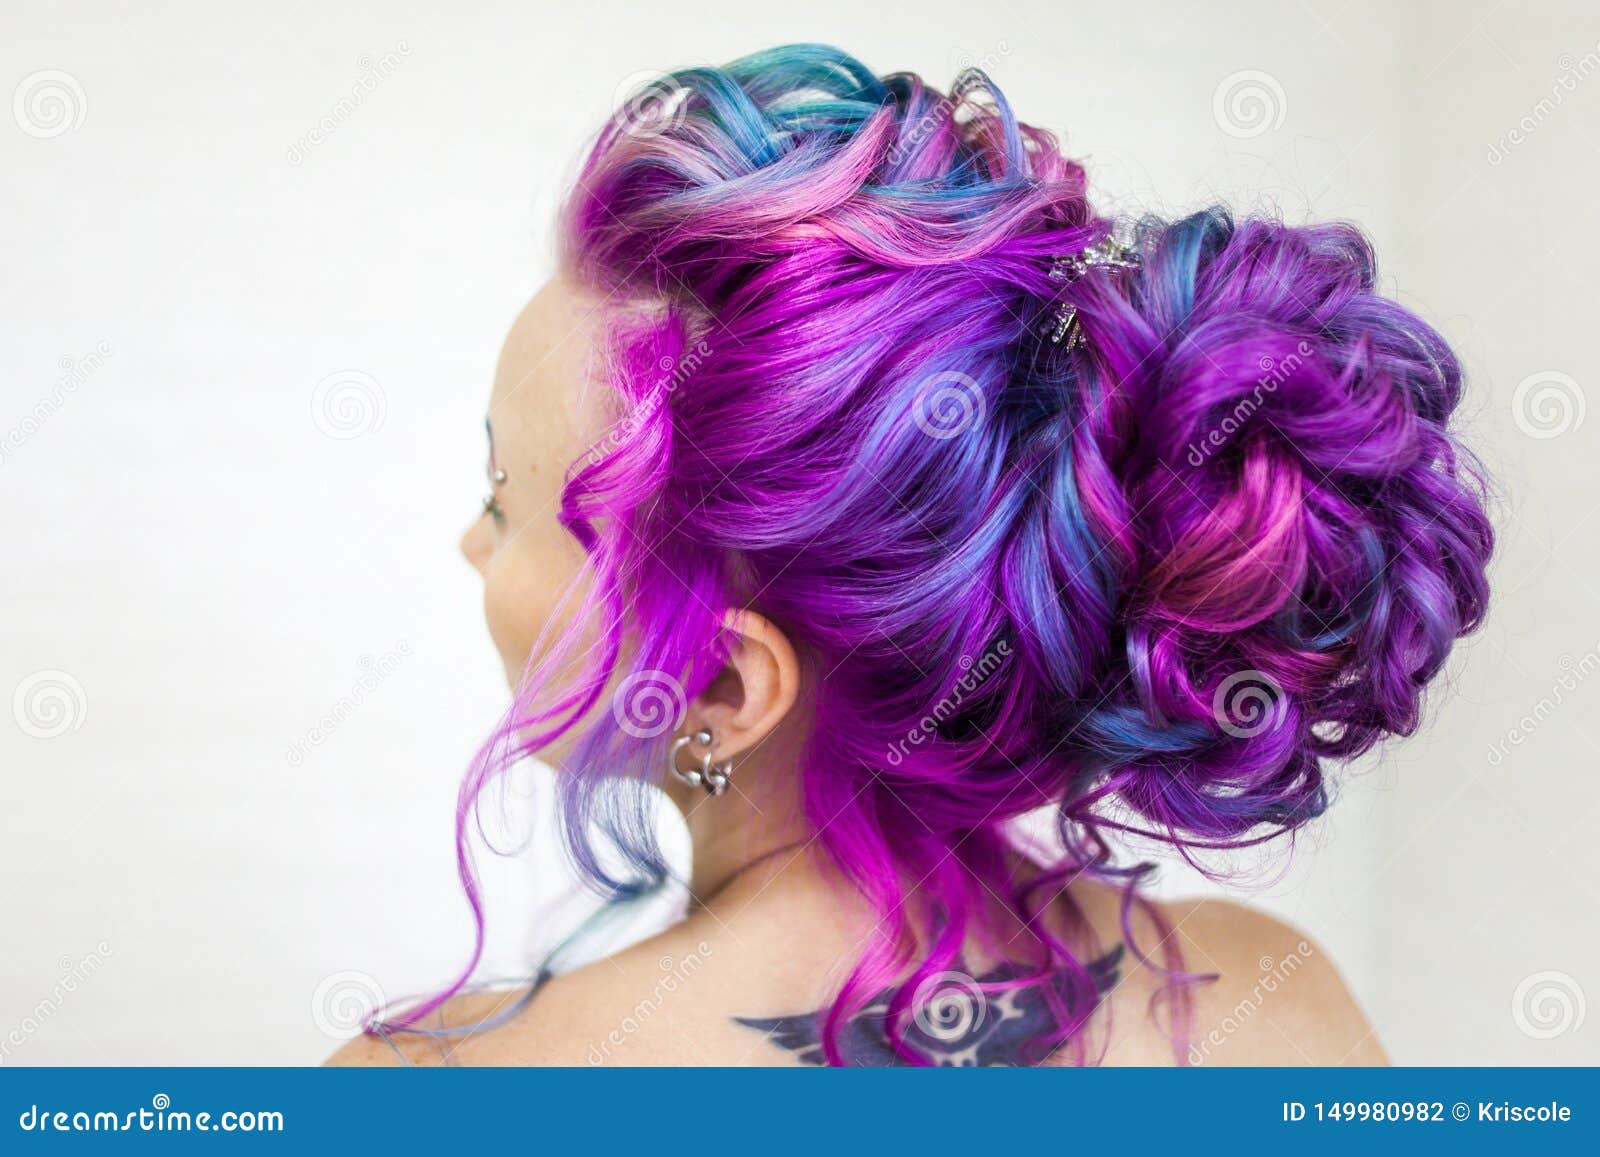 blue and magenta hair color